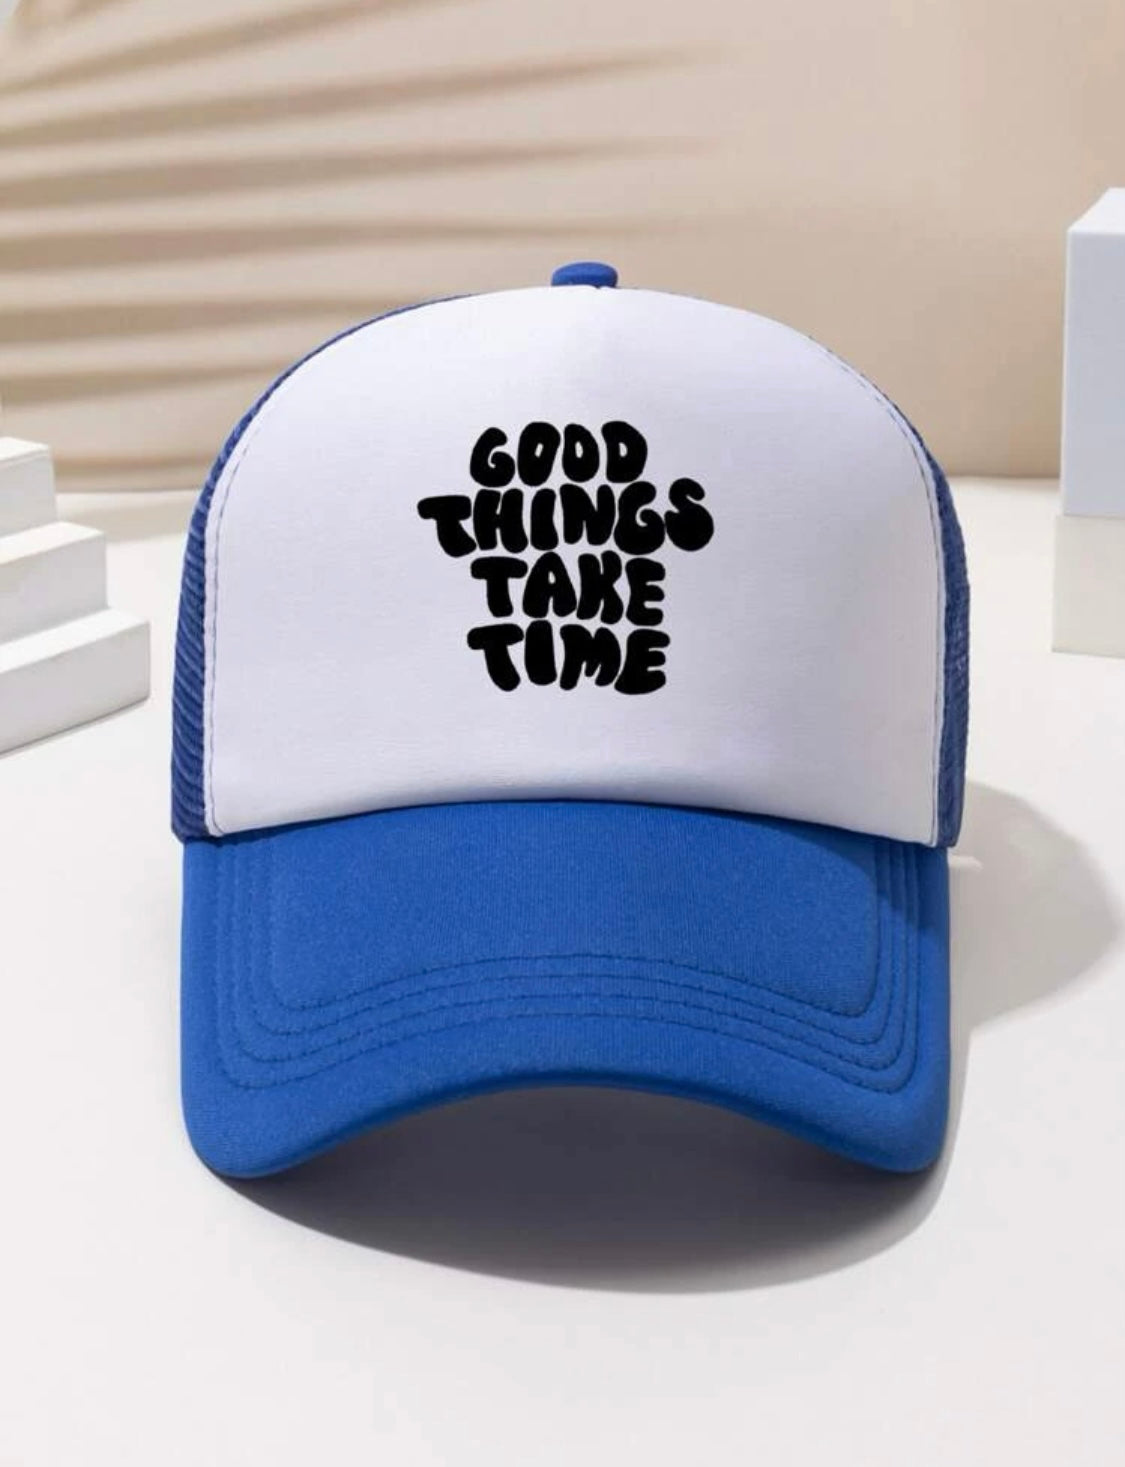 Good things TAKE TIME - TRUCKER HAT - TheSinners2Saints